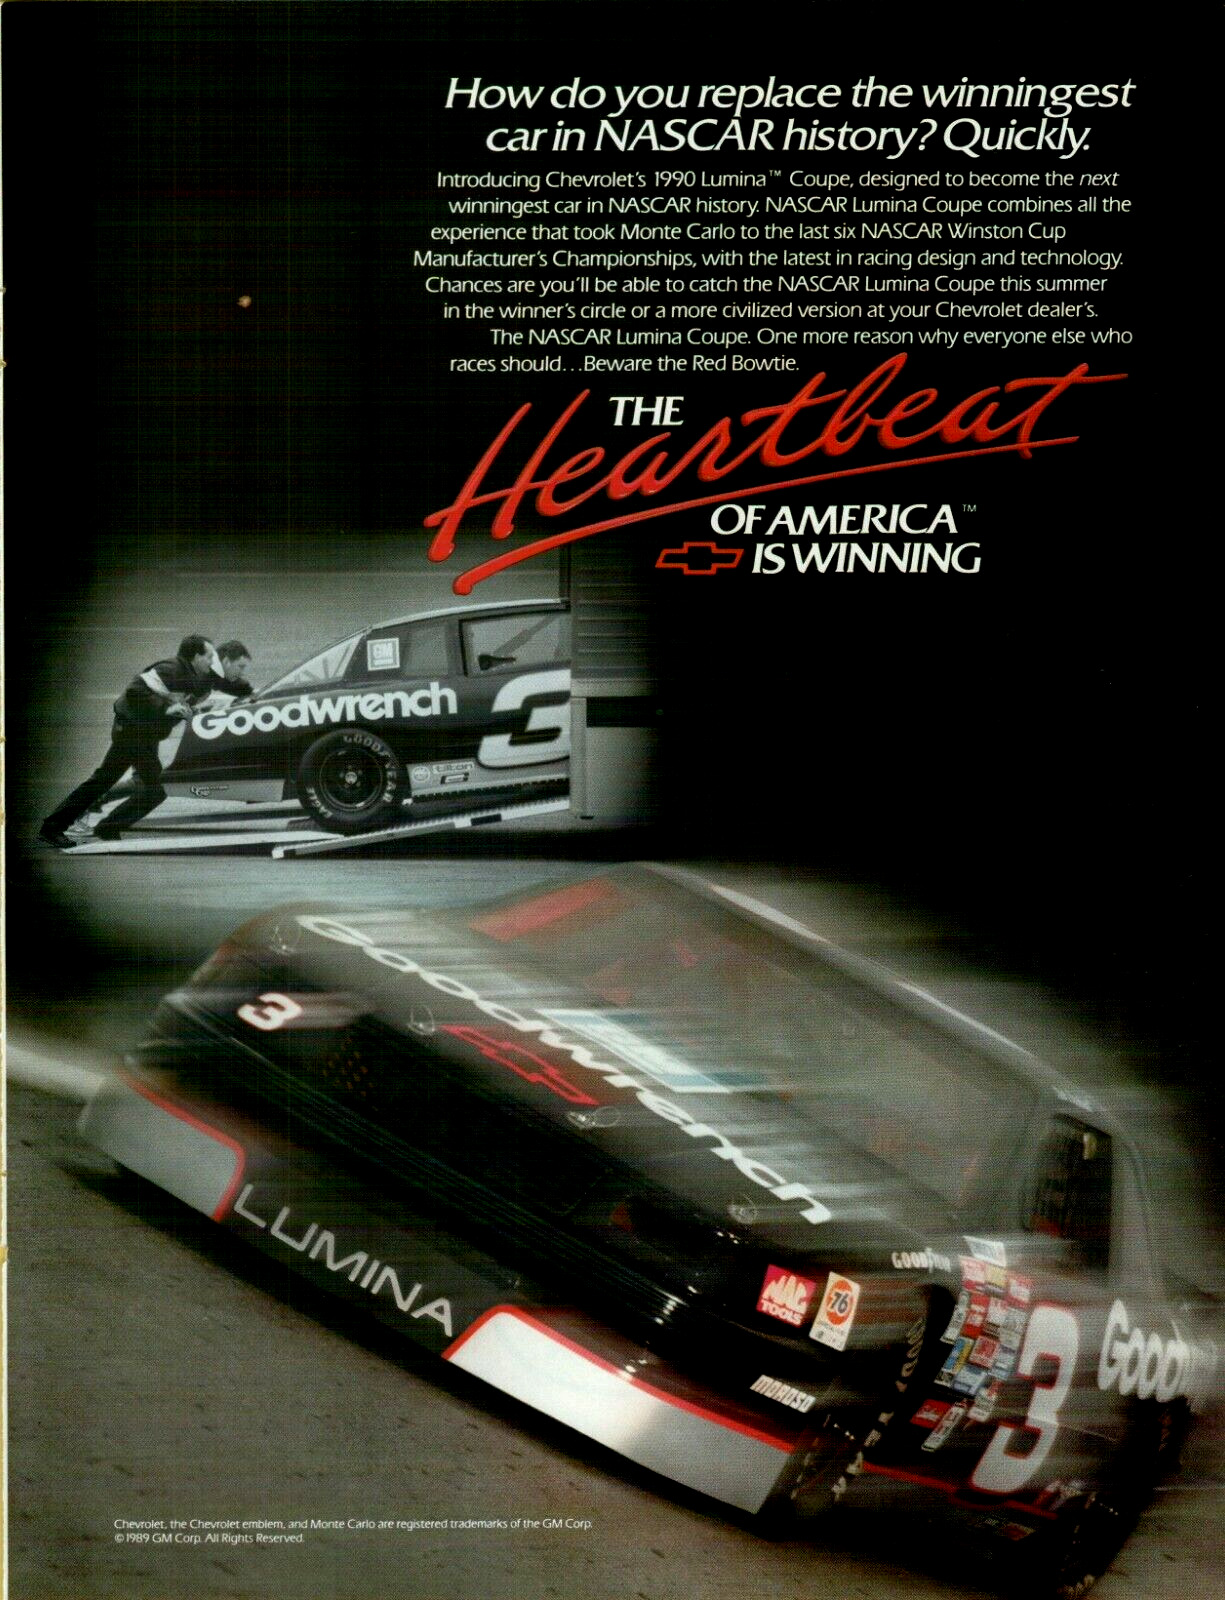 1990 Chevrolet Lumina Coupe NASCAR Winston Cup #3 Goodwrench VINTAGE PRINT AD